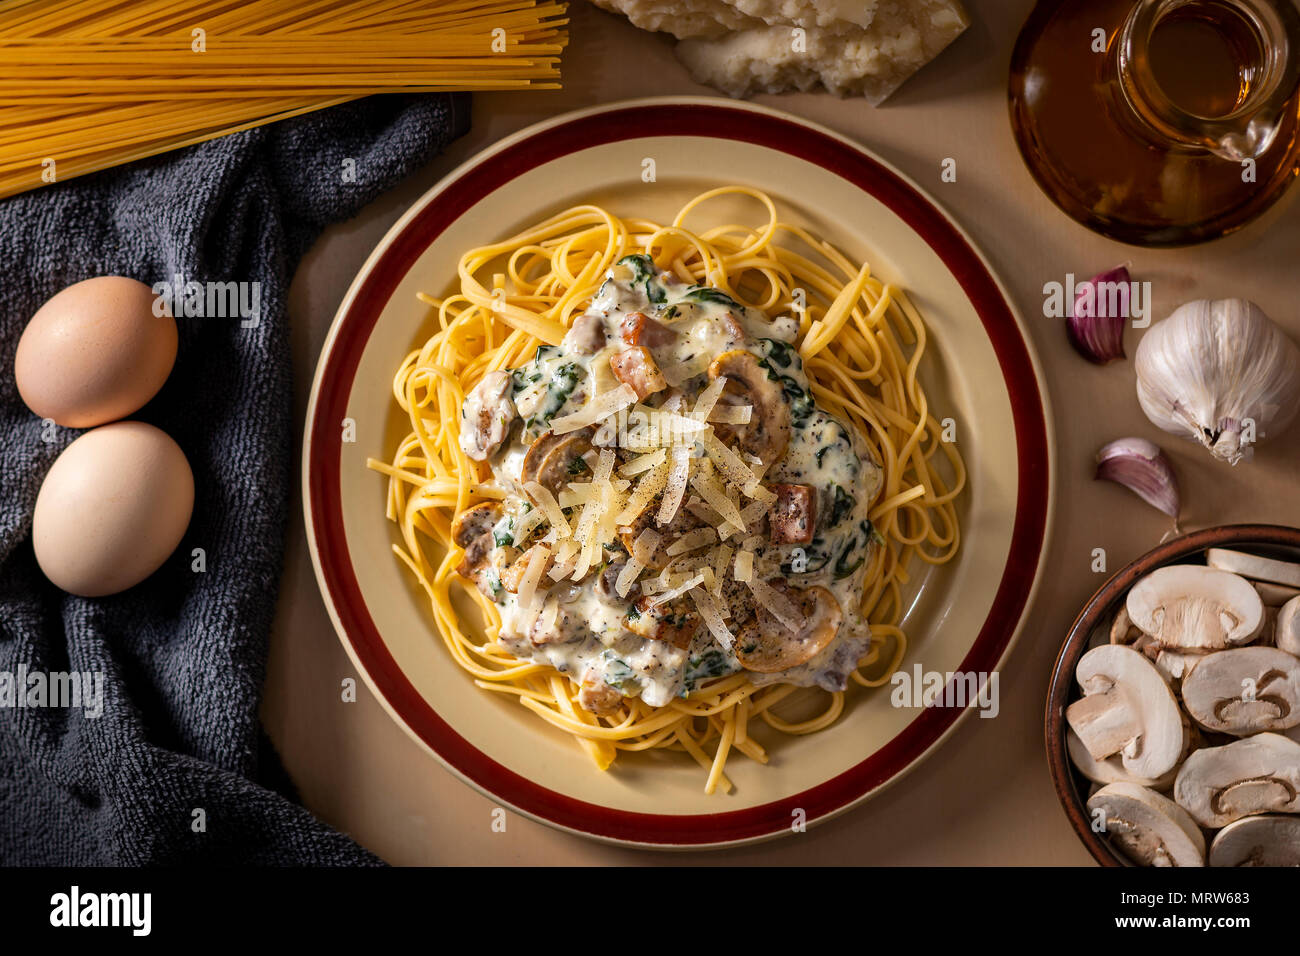 Flat lay of cooked spaghetti with creamy sauce and cheese on top arranged among fresh cooking ingredients Stock Photo